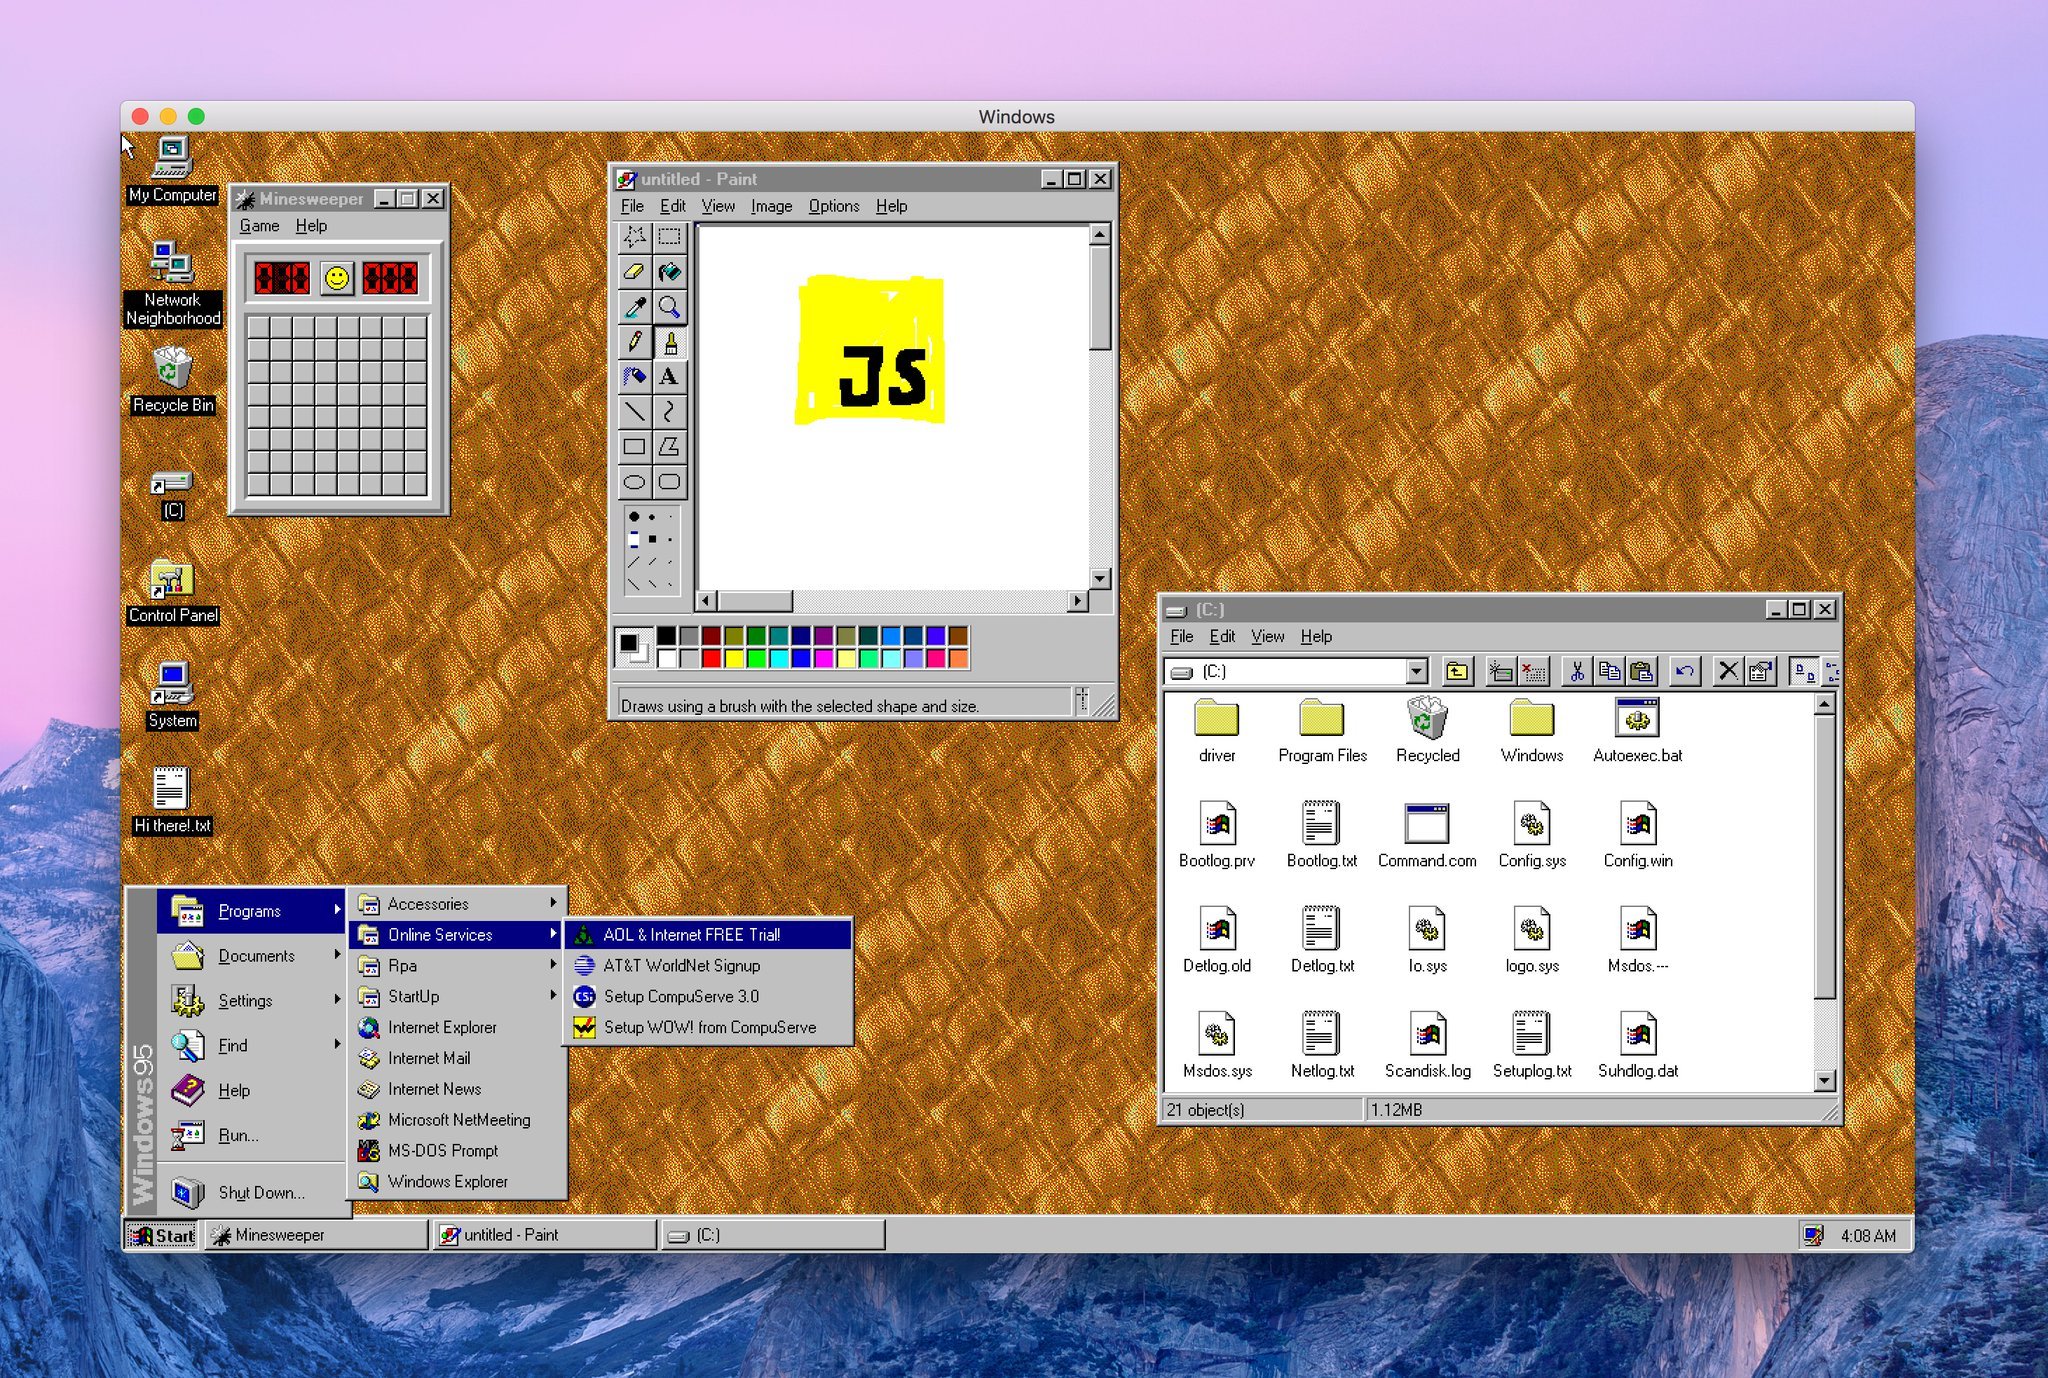 Windows 95? There's an app for that